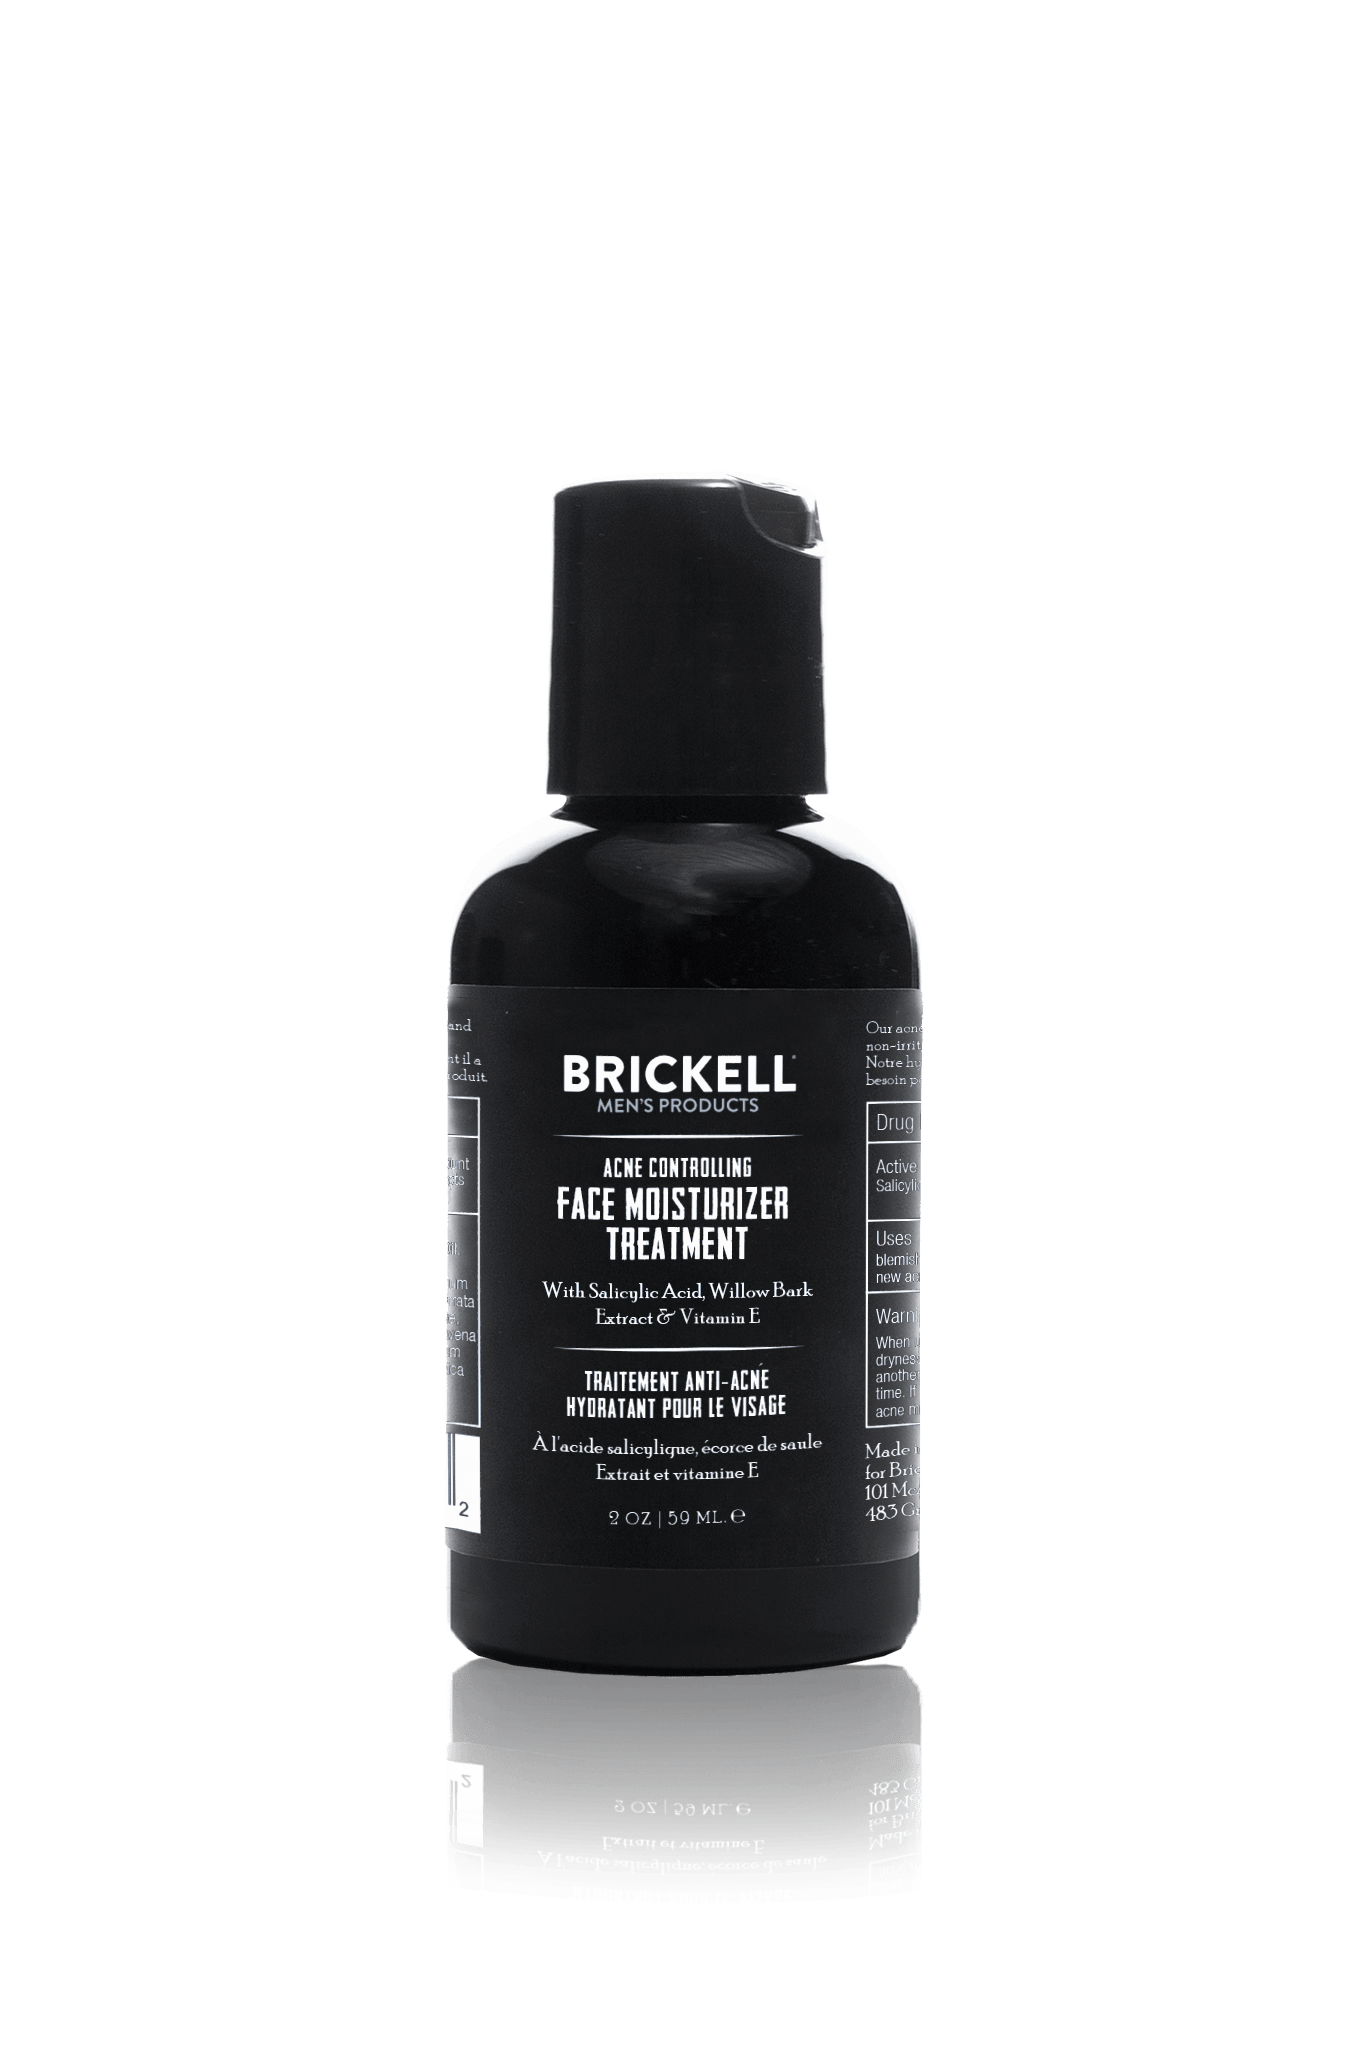 Brickell Acne Controlling Face Moisturizer Treatment - 59ml - Glow Addict Luxe